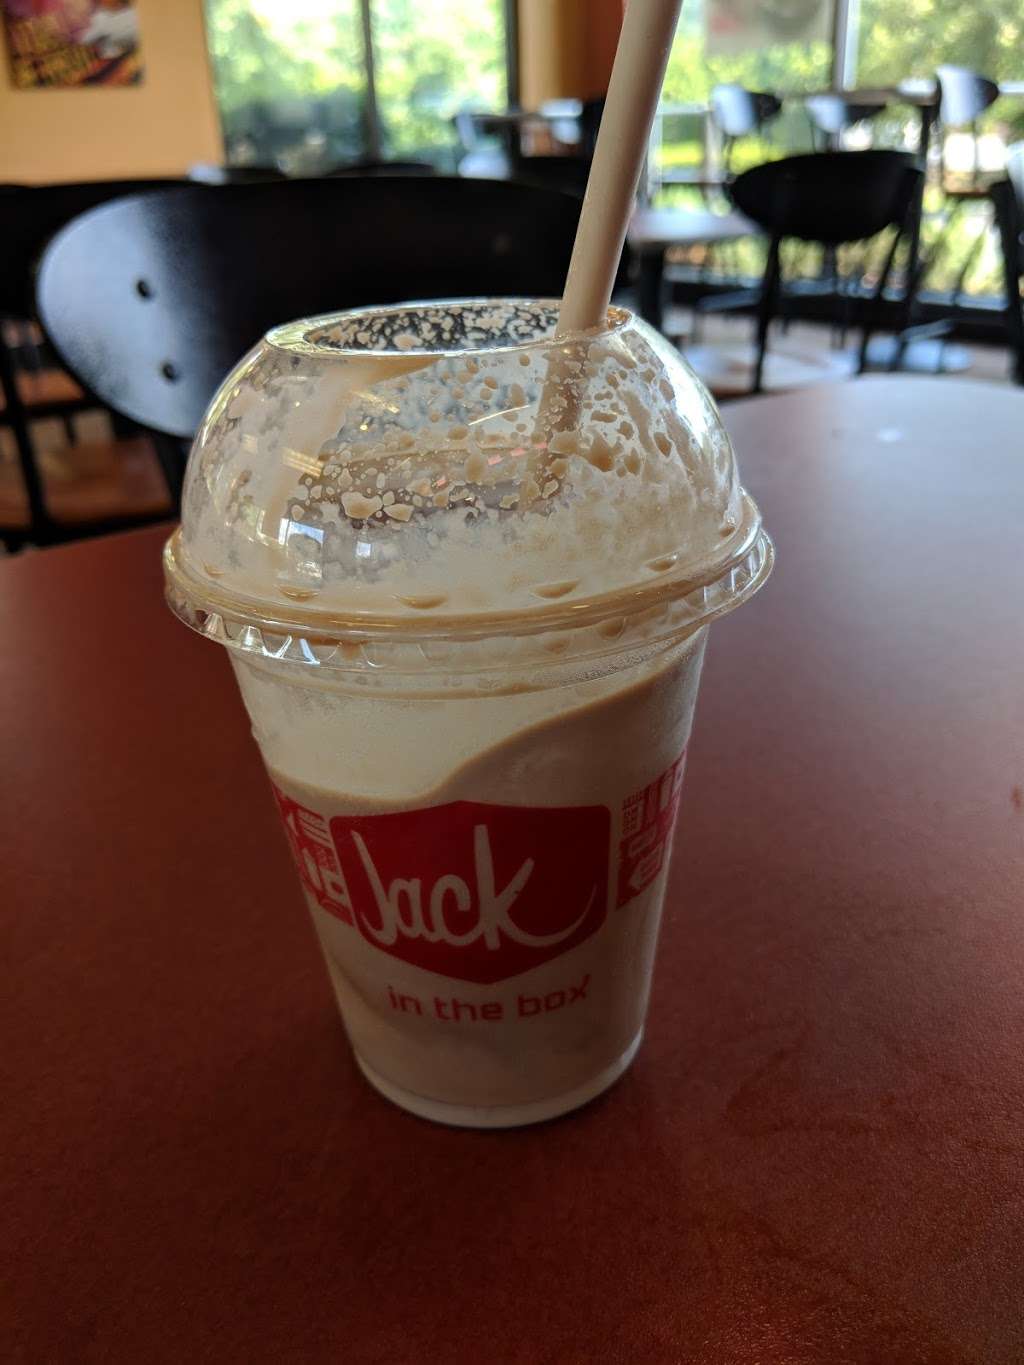 Jack in the Box | 895 Heckle Blvd, Rock Hill, SC 29730 | Phone: (803) 366-3255